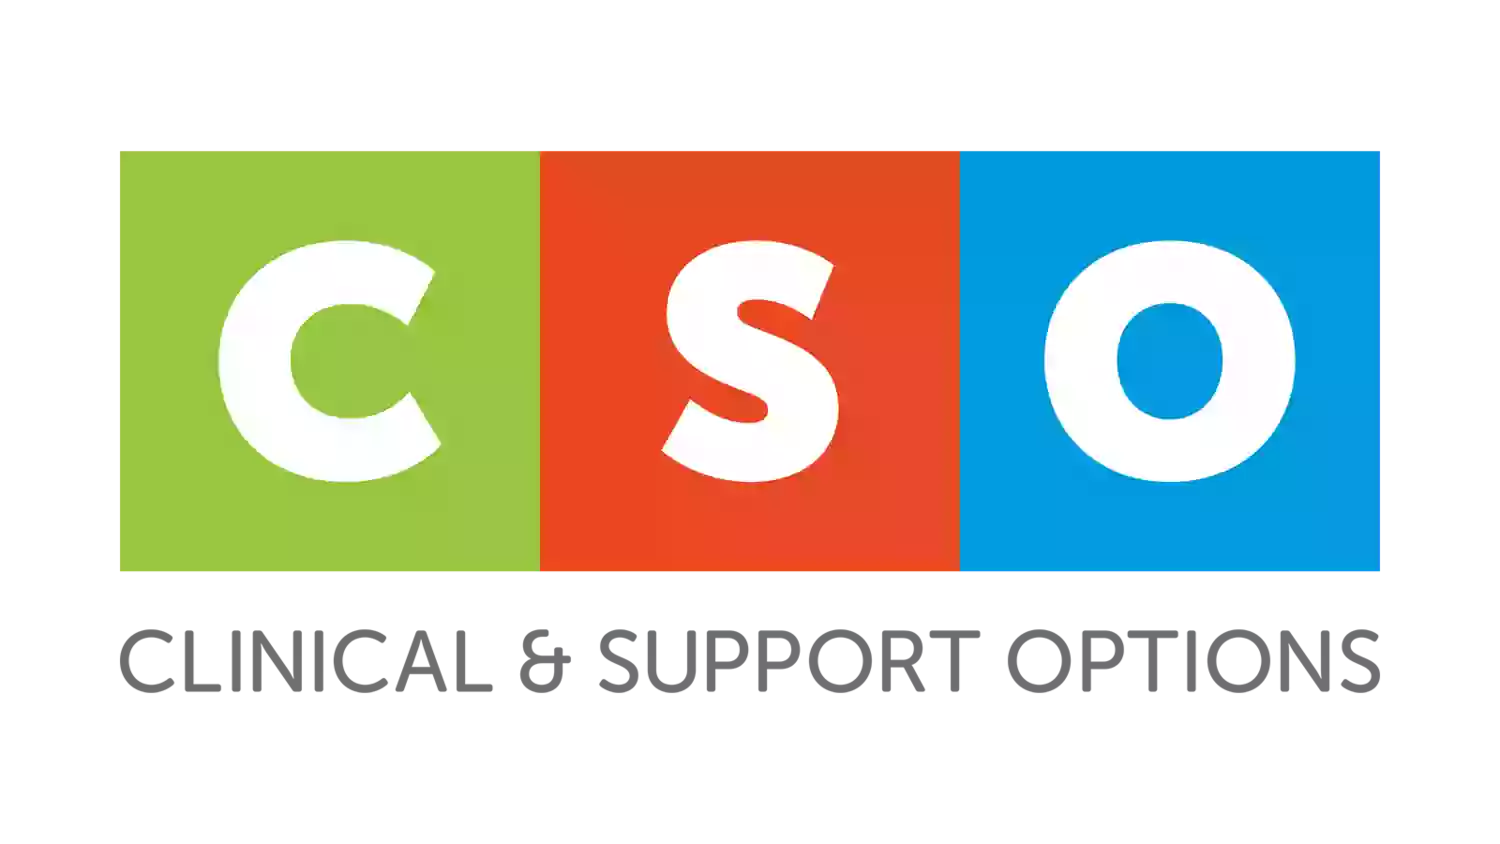 Clinical & Support Options